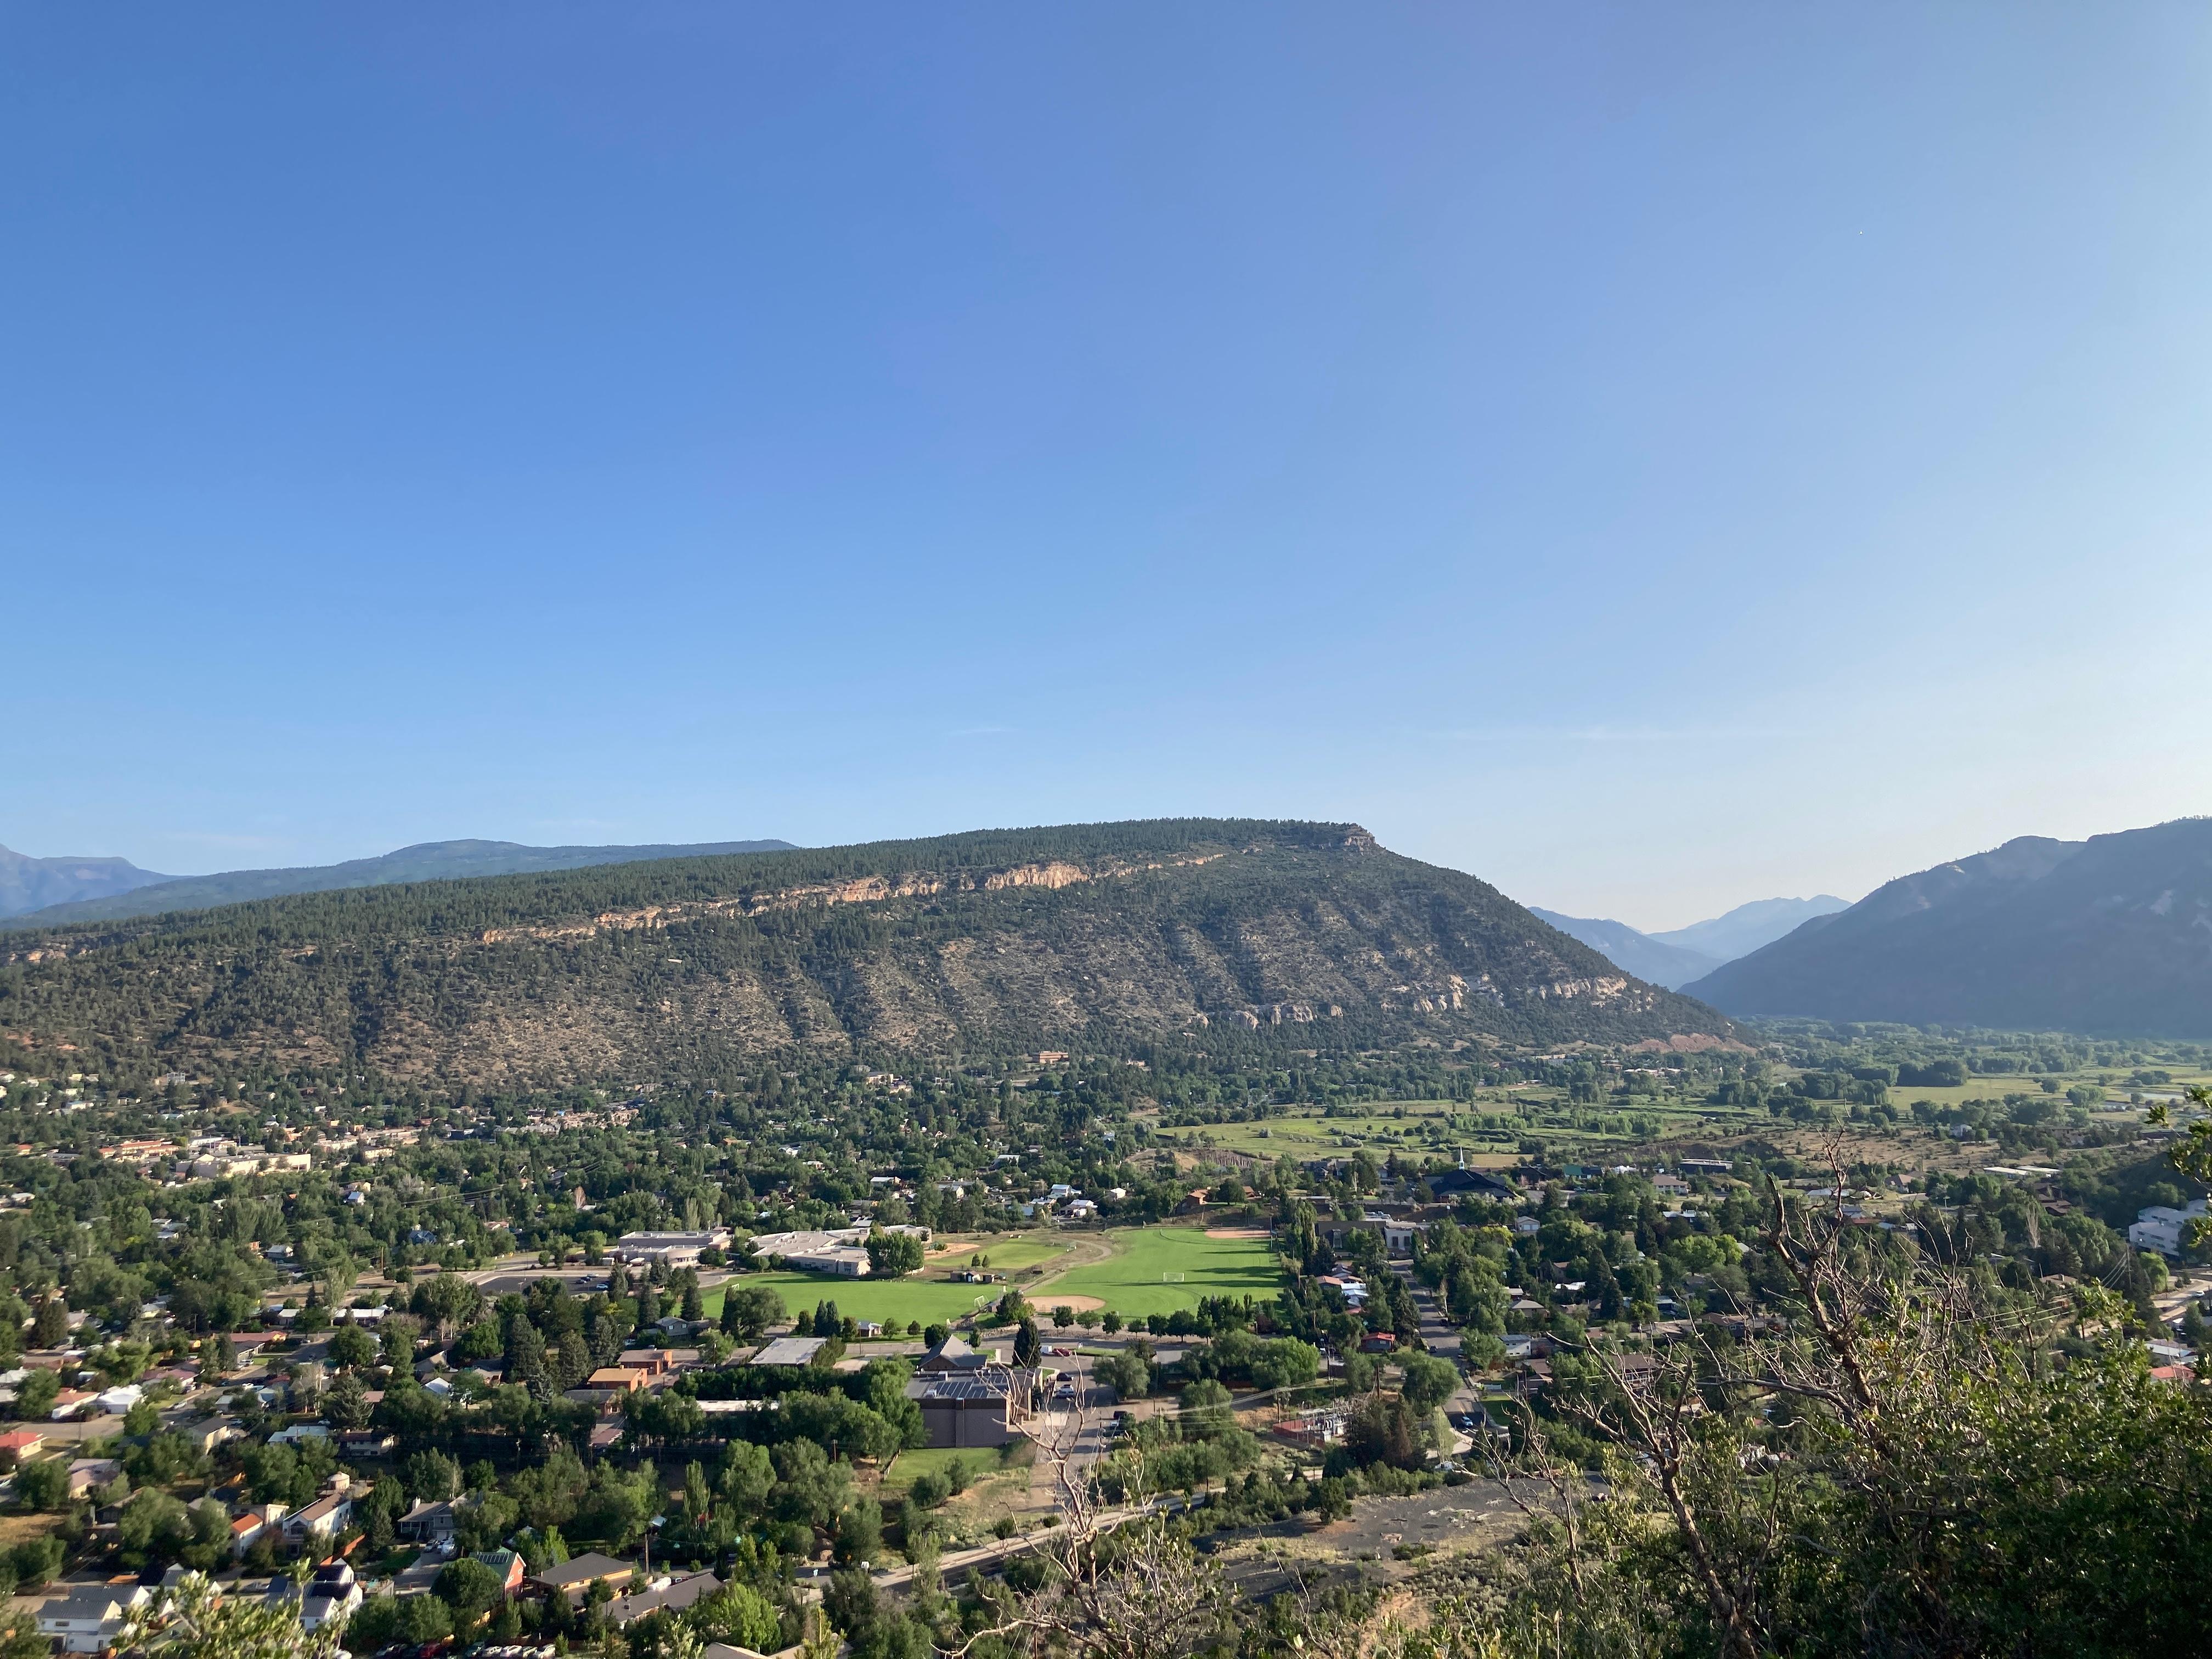 Animas CIty Mountain, part of the city of Durango and the Animas River Valley are seen from an overlook at Fort Lews College.